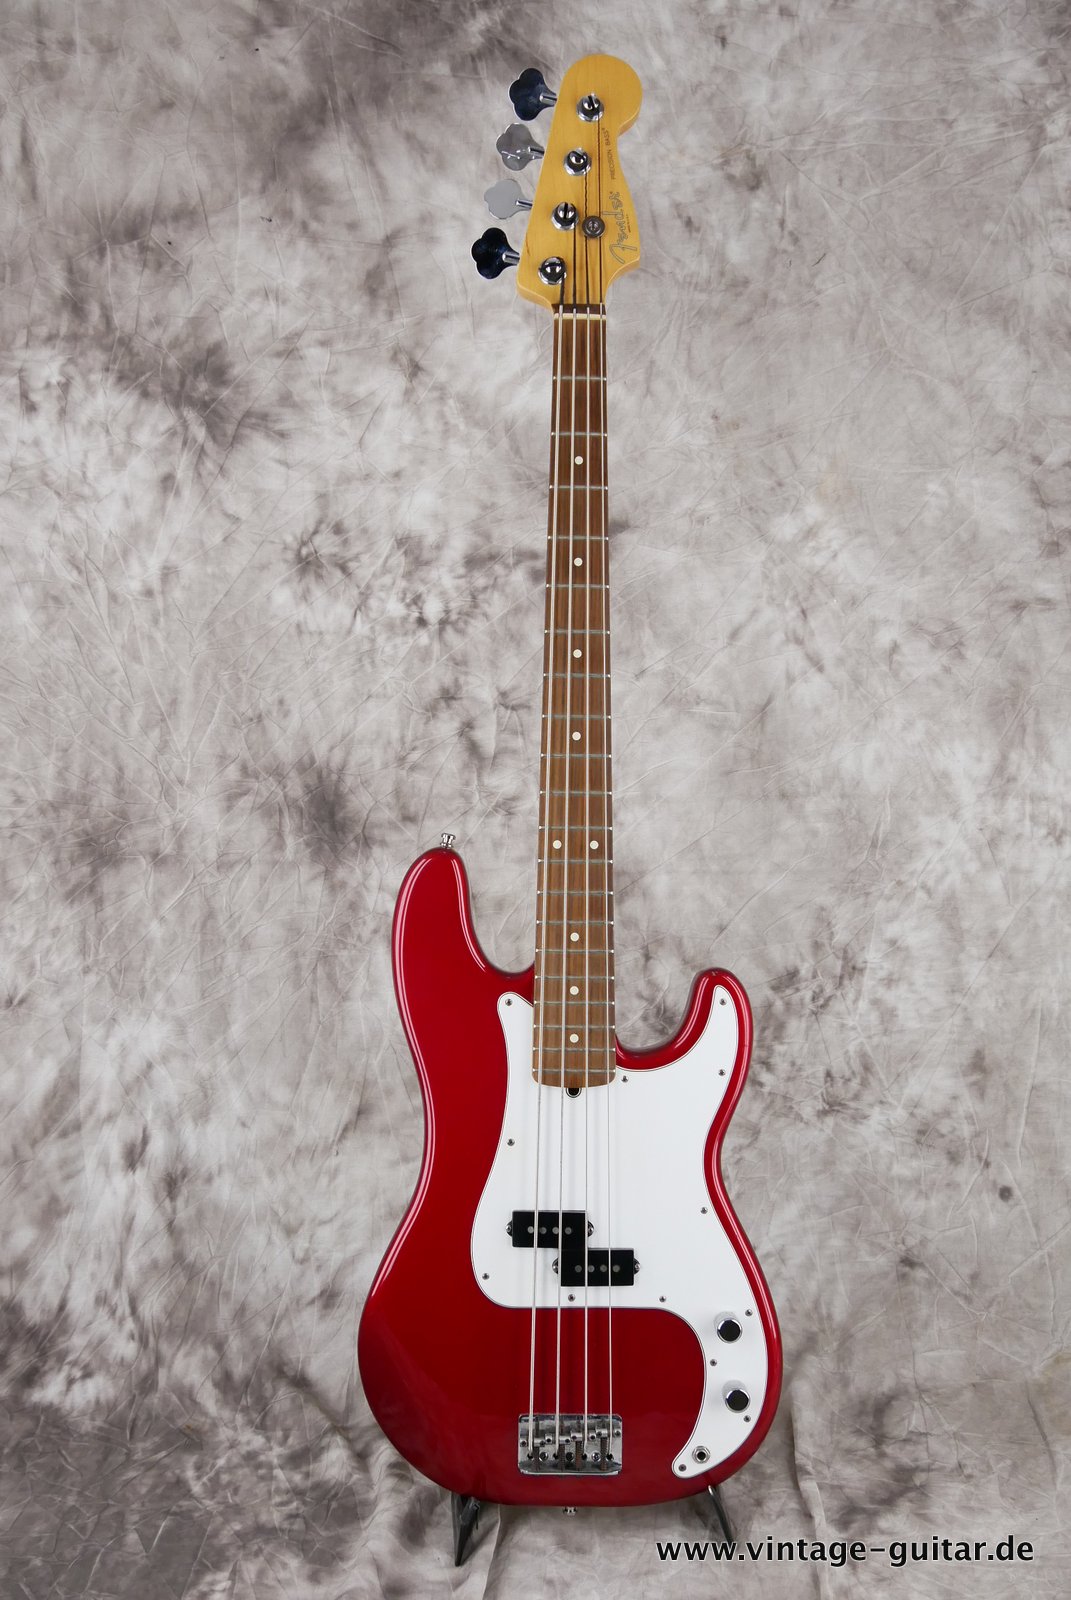 Fender-Precision-Bass-1994-candy-apple-red-001.JPG